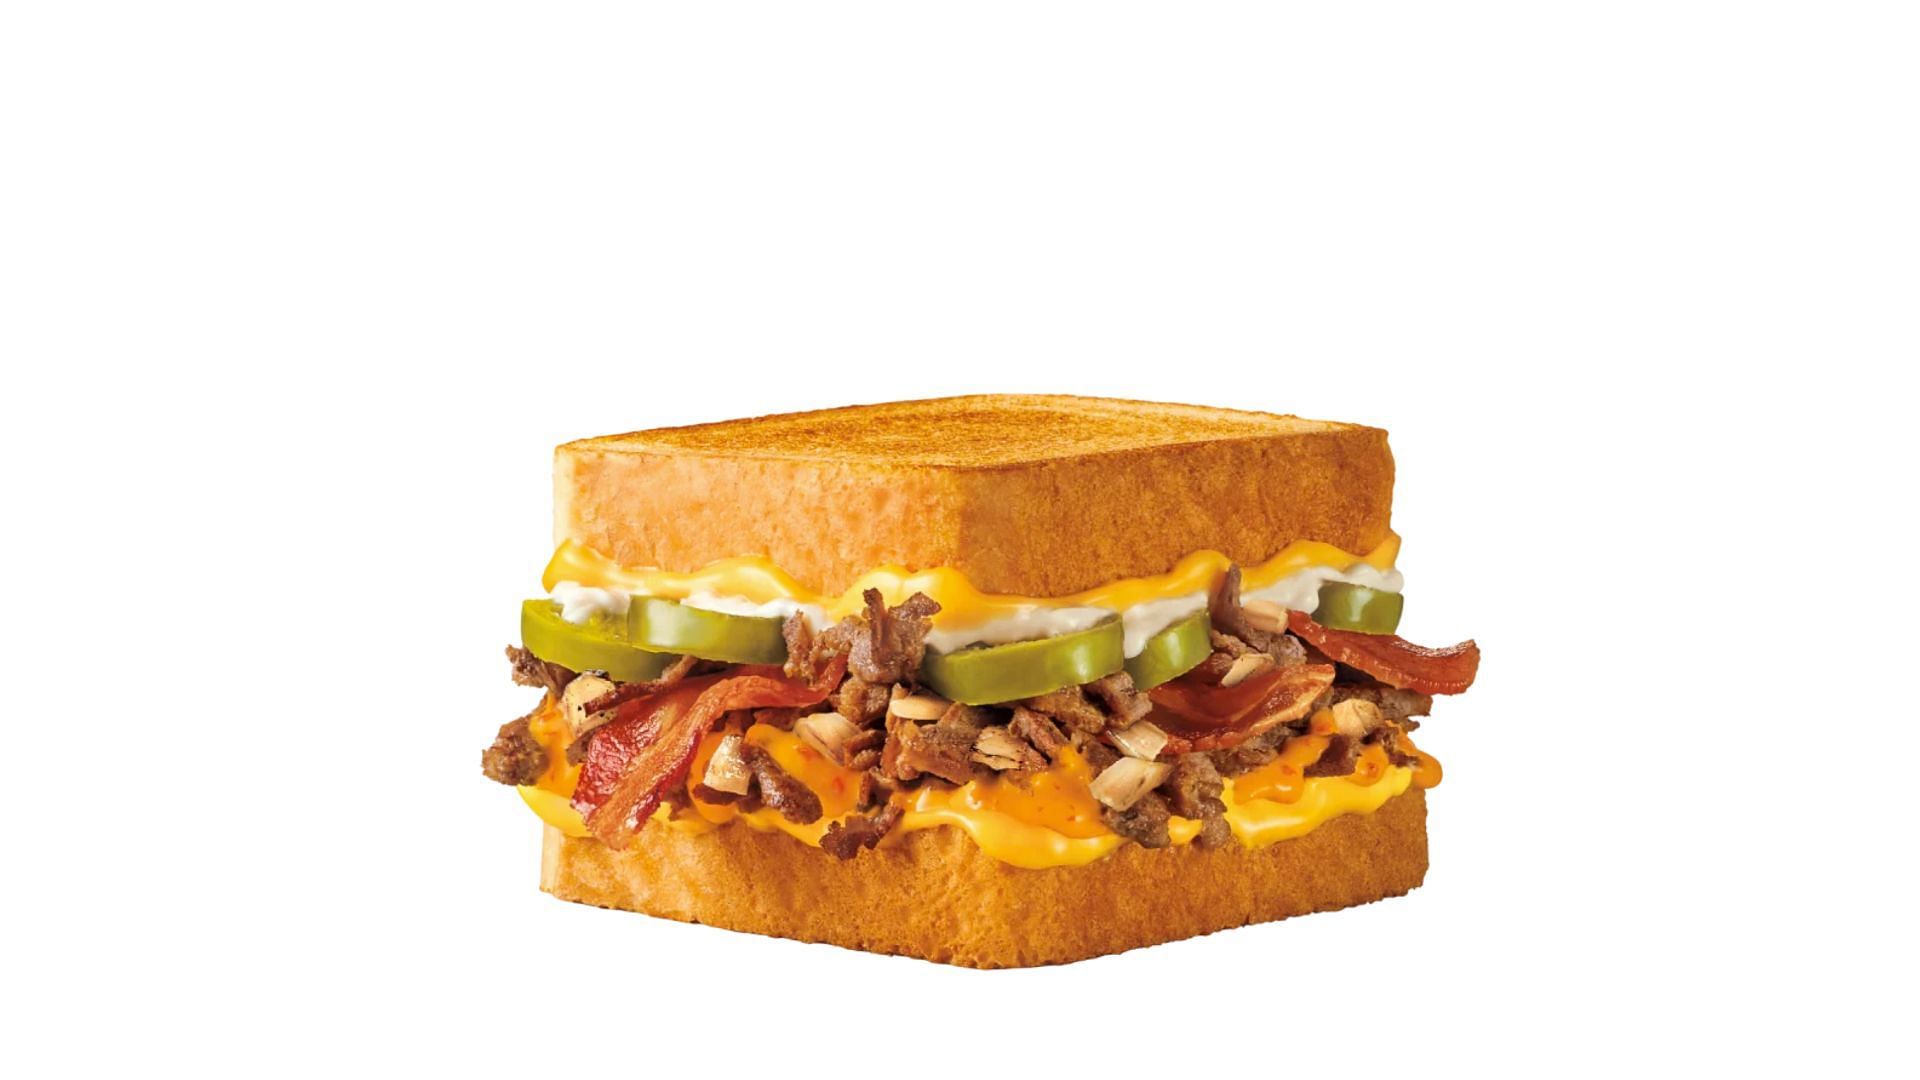 Steak and Bacon Grilled Cheese Sandwich - Spicy (Image via Sonic)